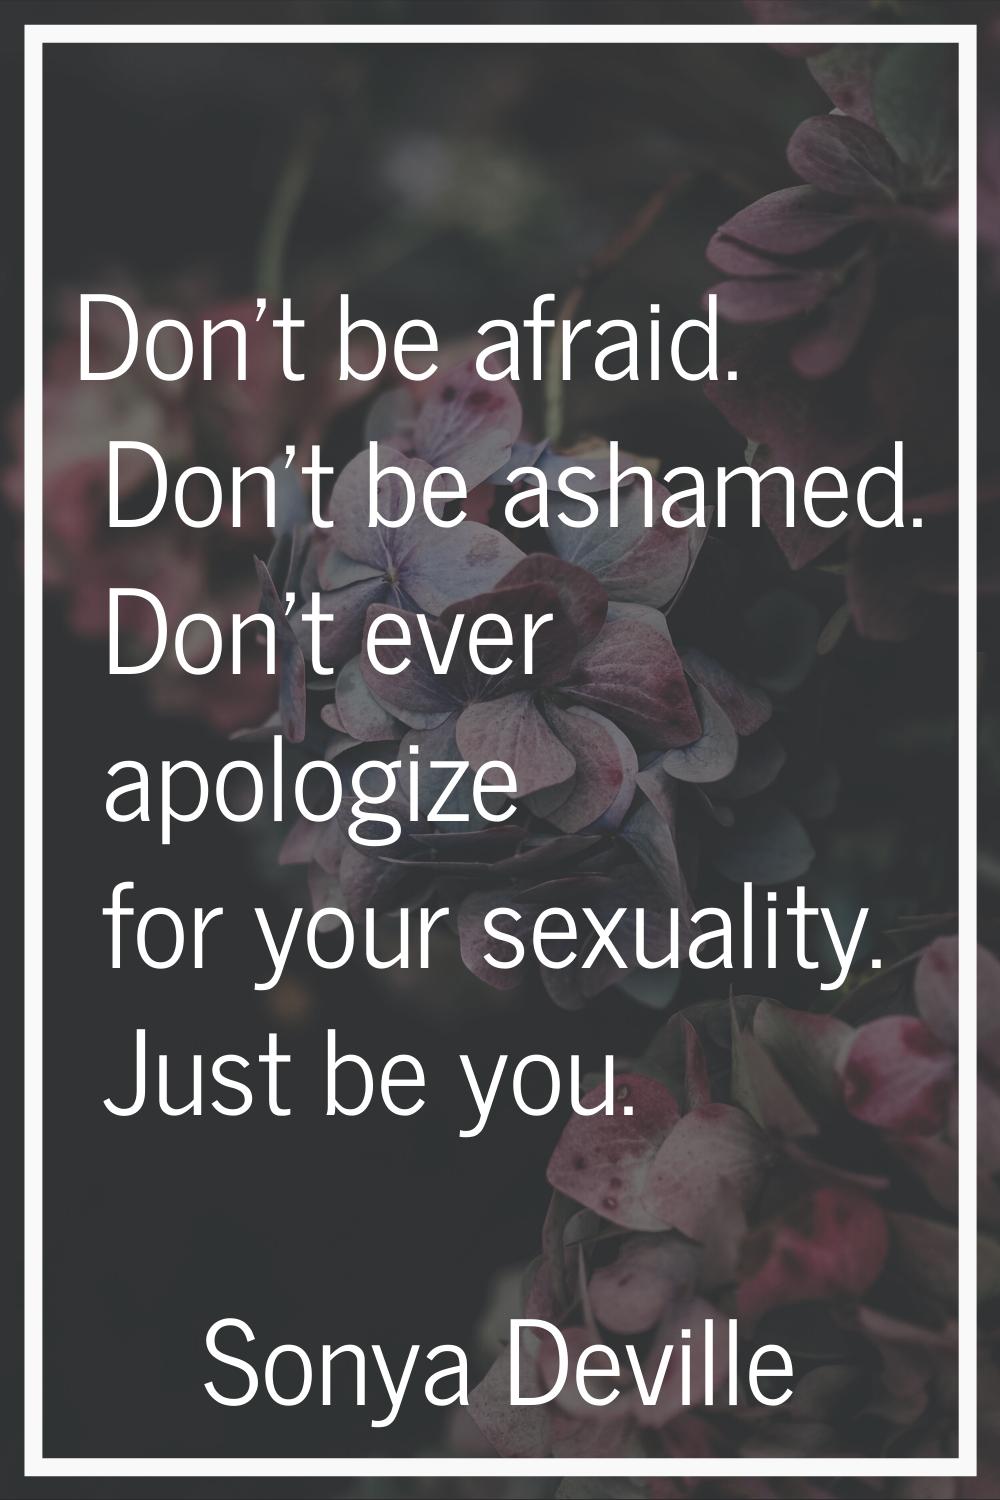 Don't be afraid. Don't be ashamed. Don't ever apologize for your sexuality. Just be you.